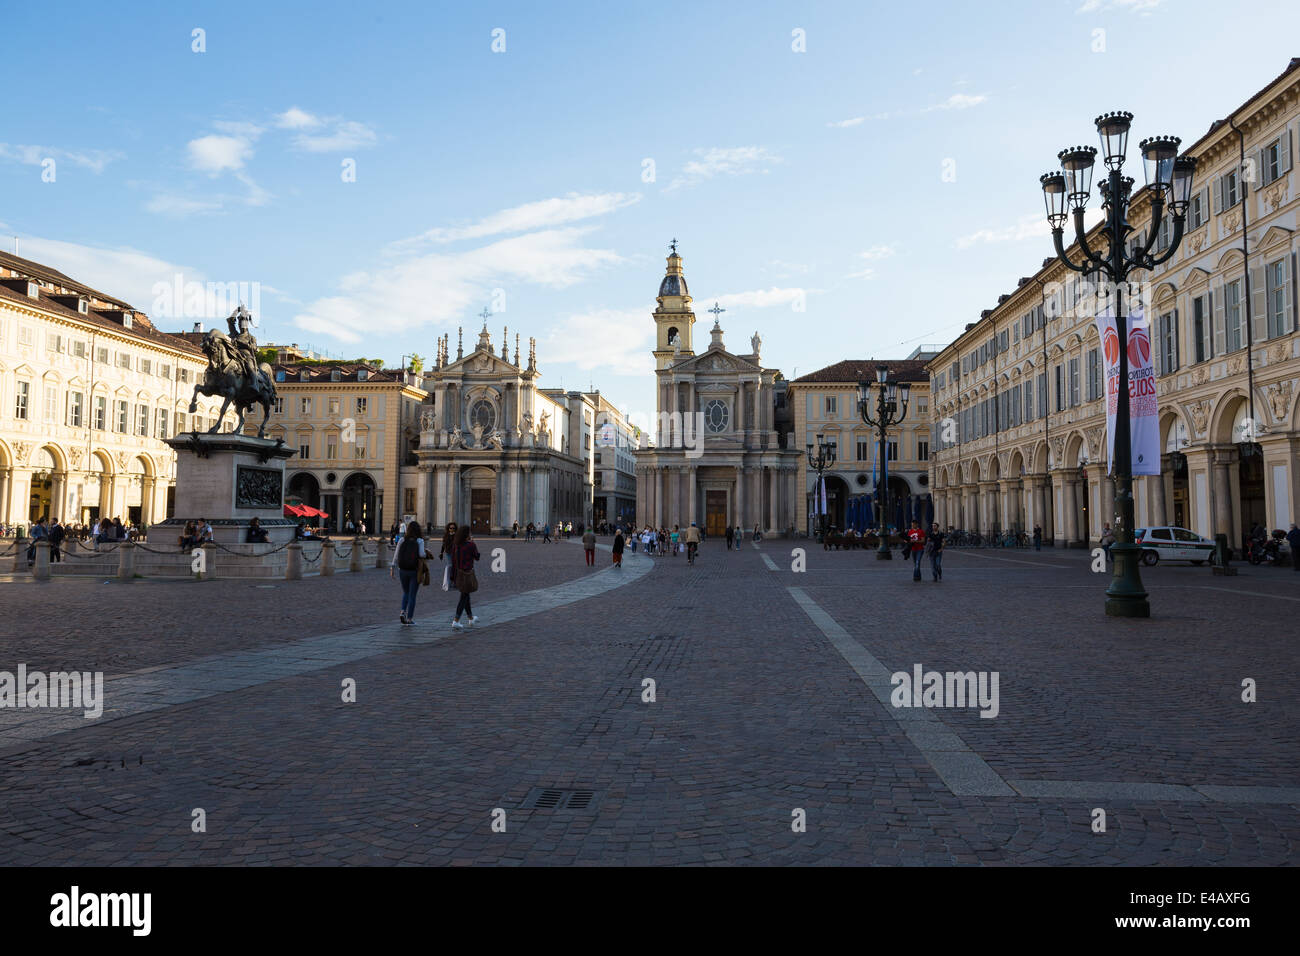 Piazza San Carlo from the North, Turin, Italy. The statue of Emanuele Filiberto on the left and the churches of Santa Cristina (L) and San Carlo (R). Stock Photo